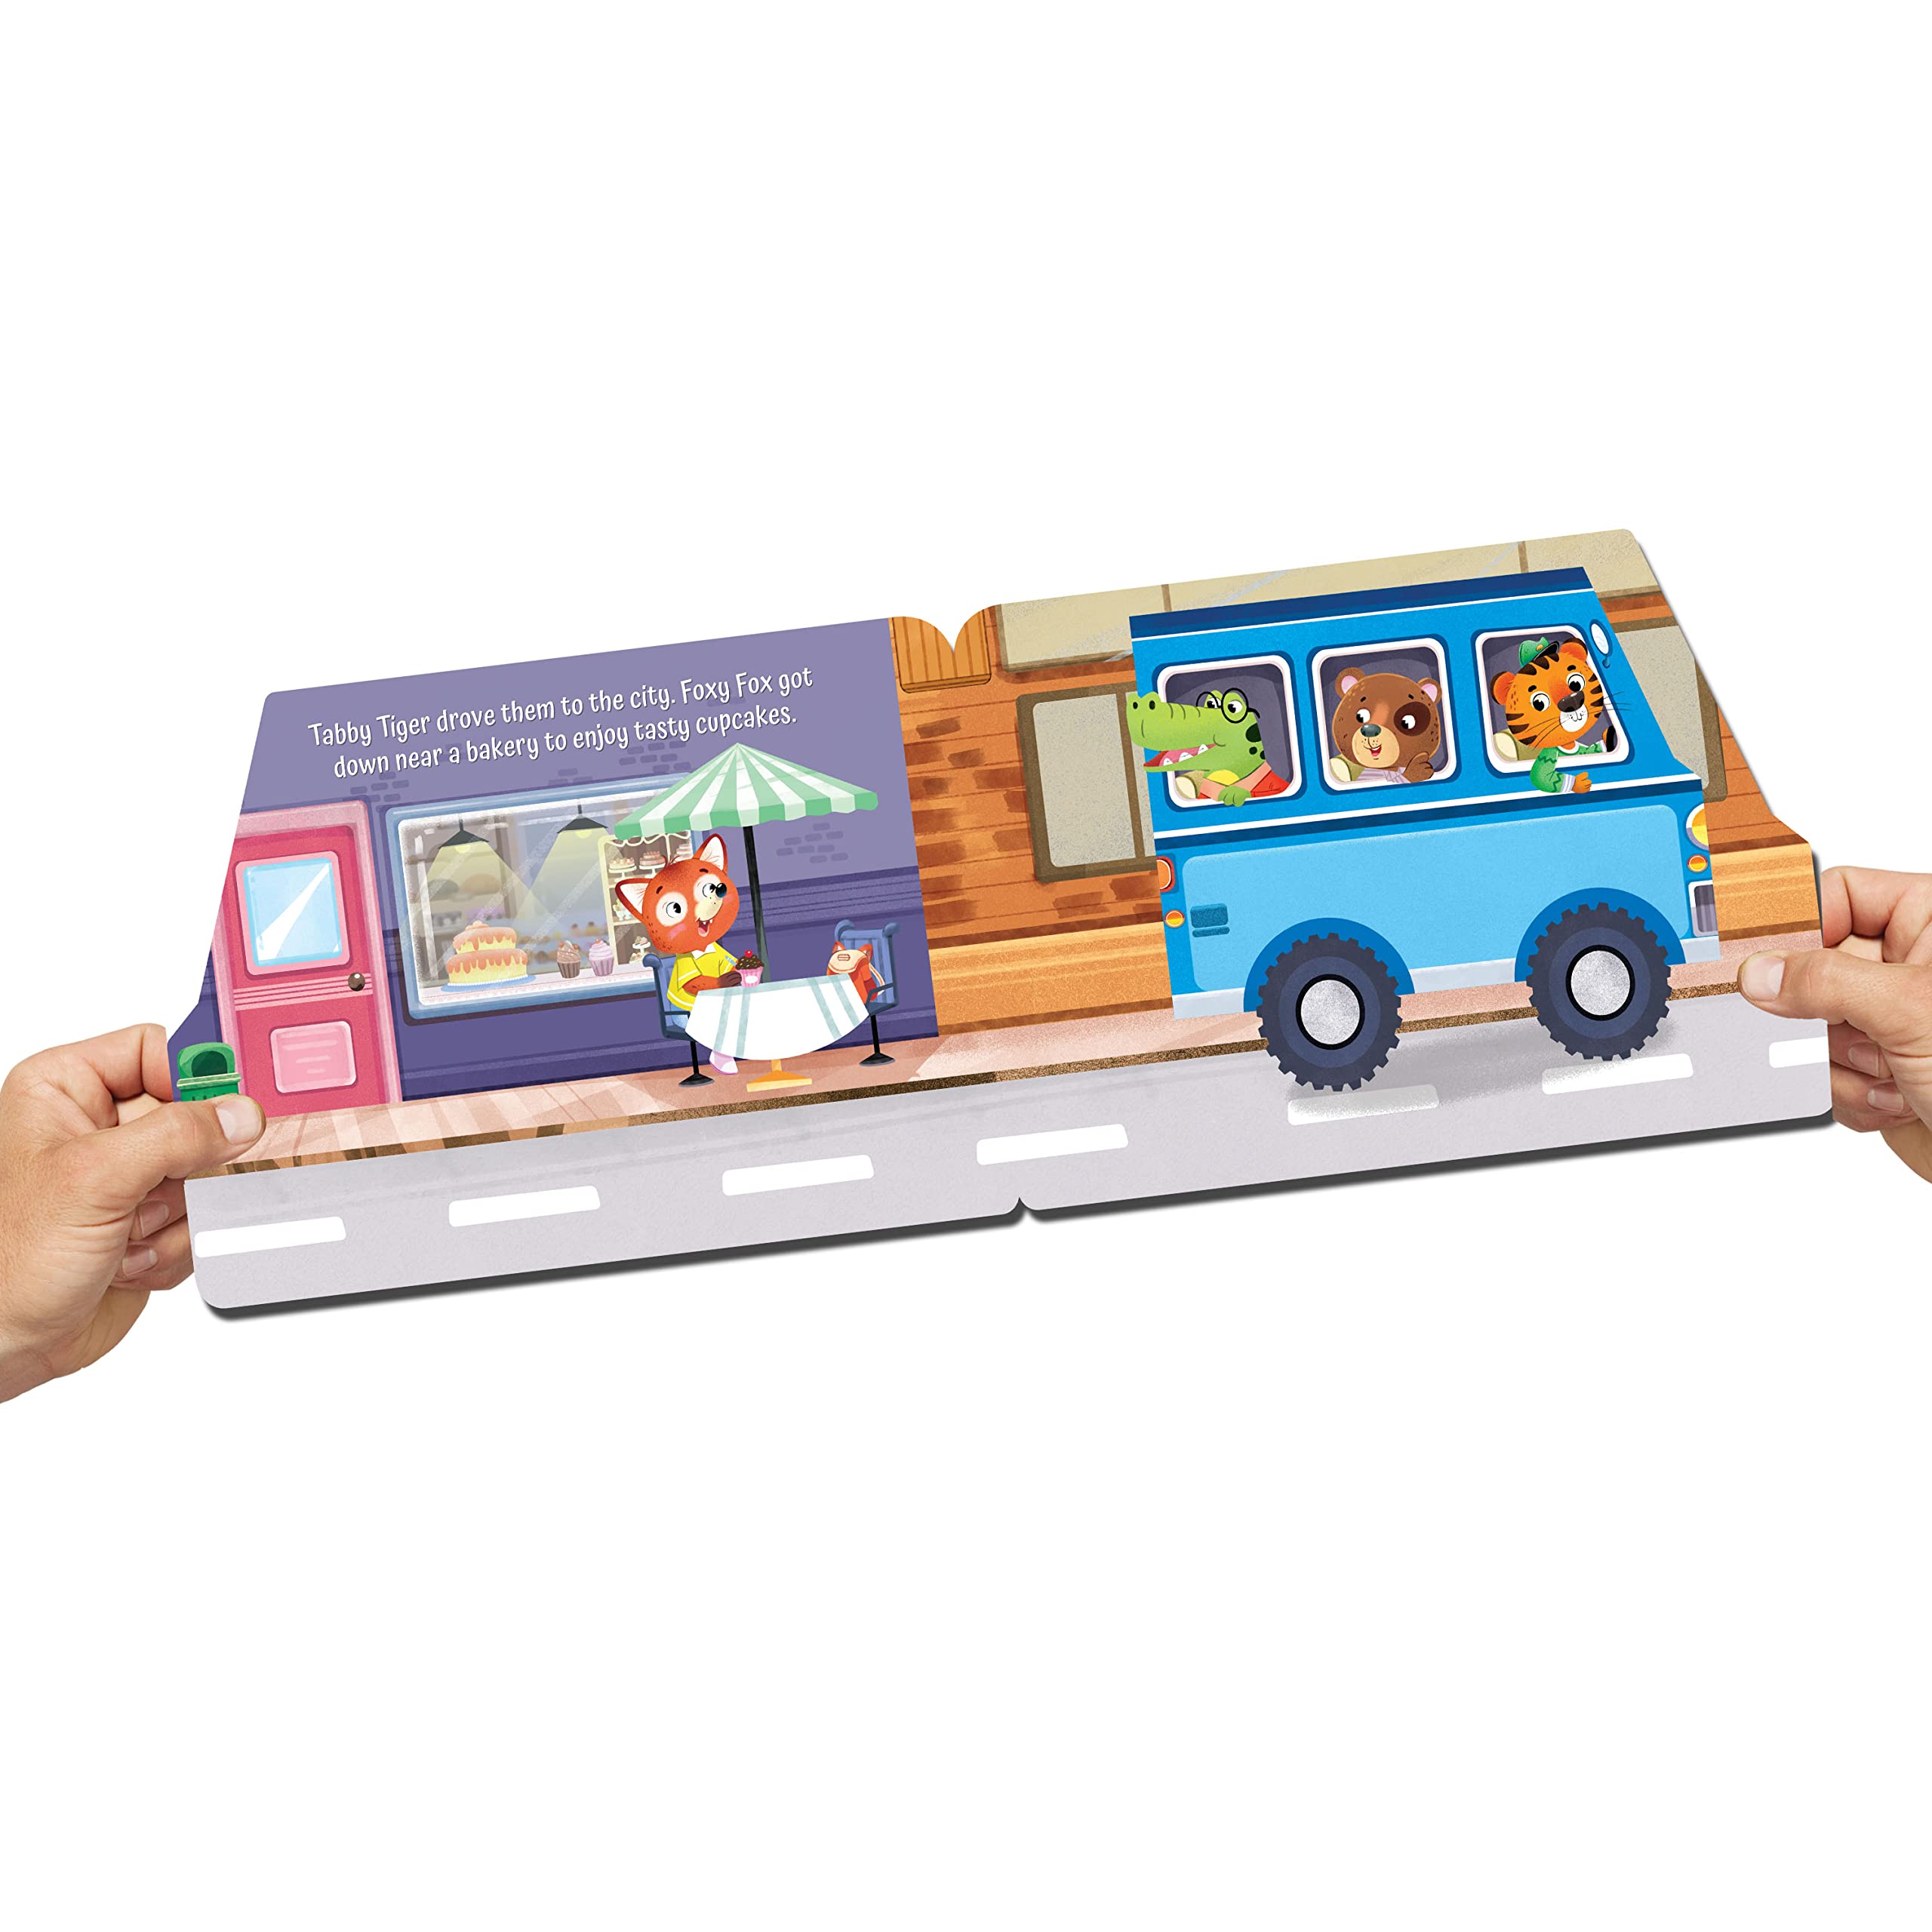 A City Tour on the Bus- A Shaped Board book with Wheels Board book